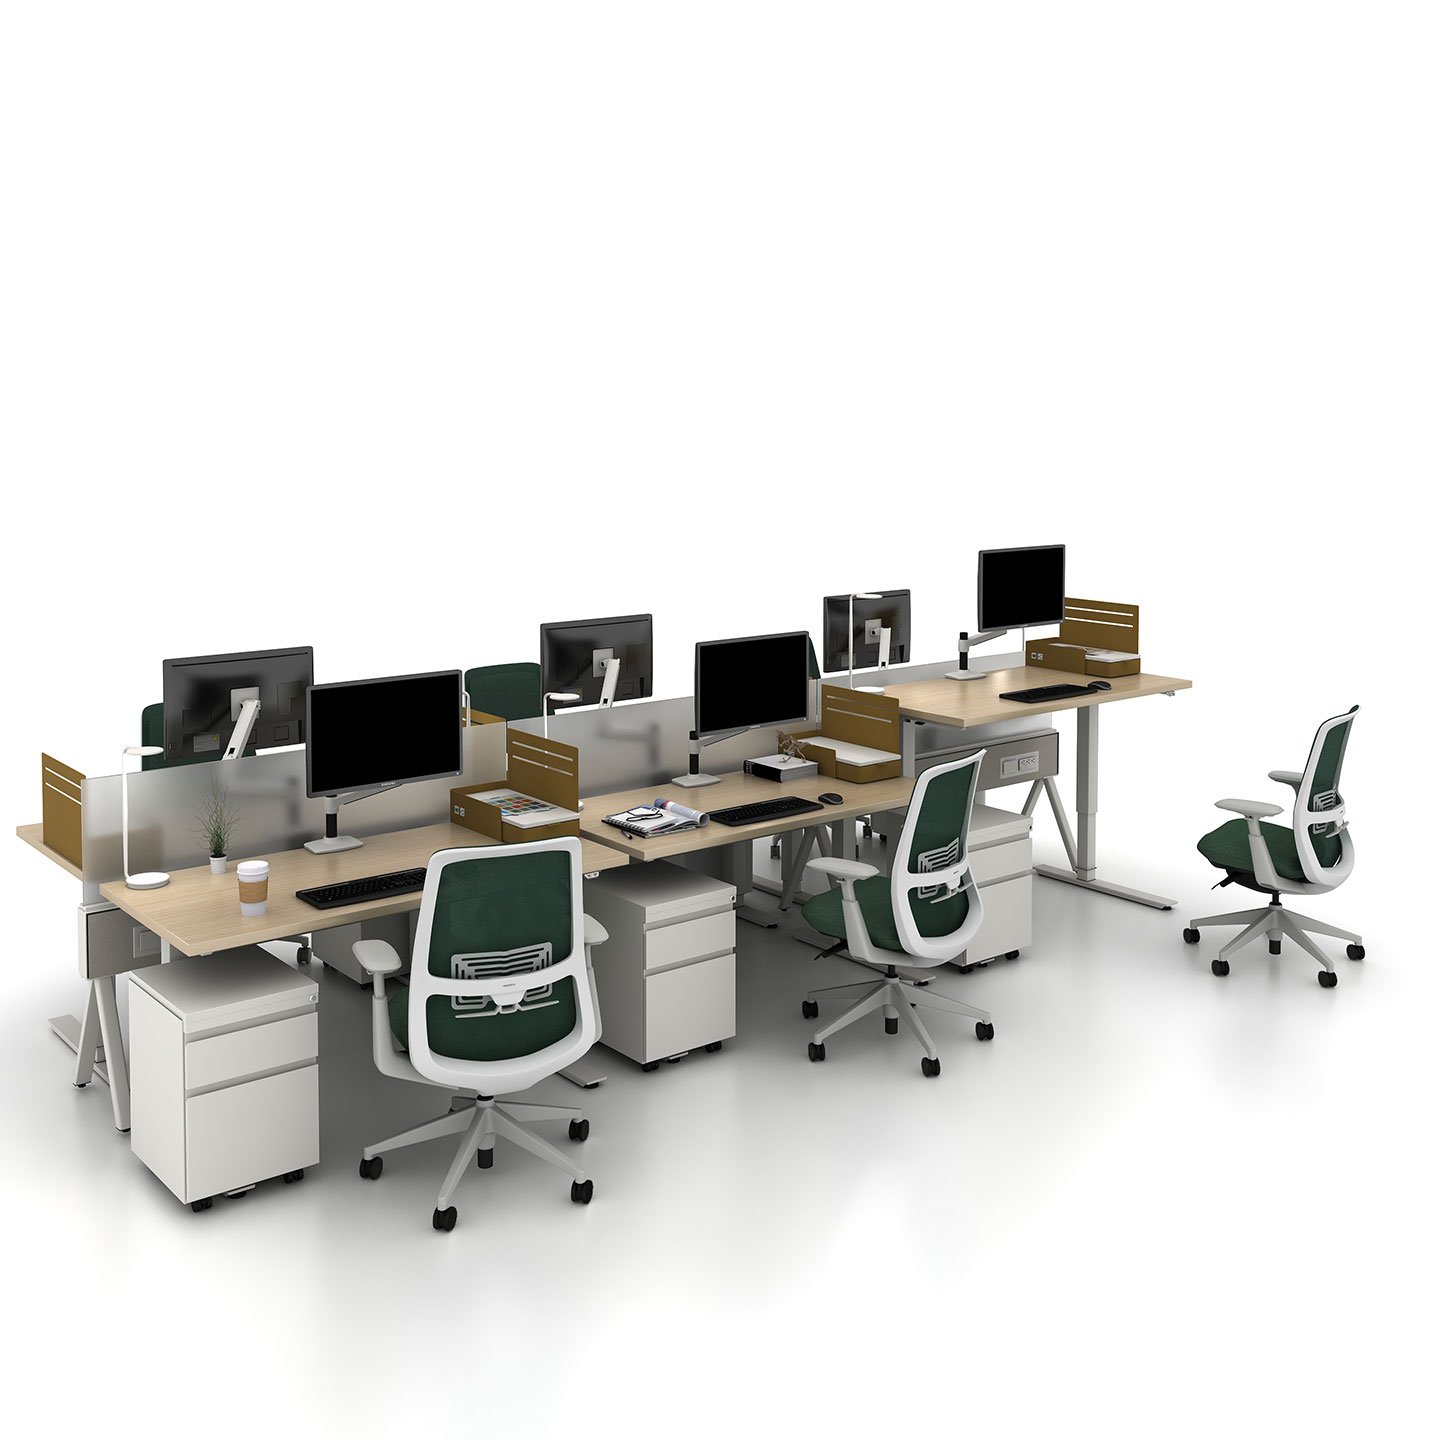 Haworth Compose Beam Workspace divider in mock office space with height adjustable desks